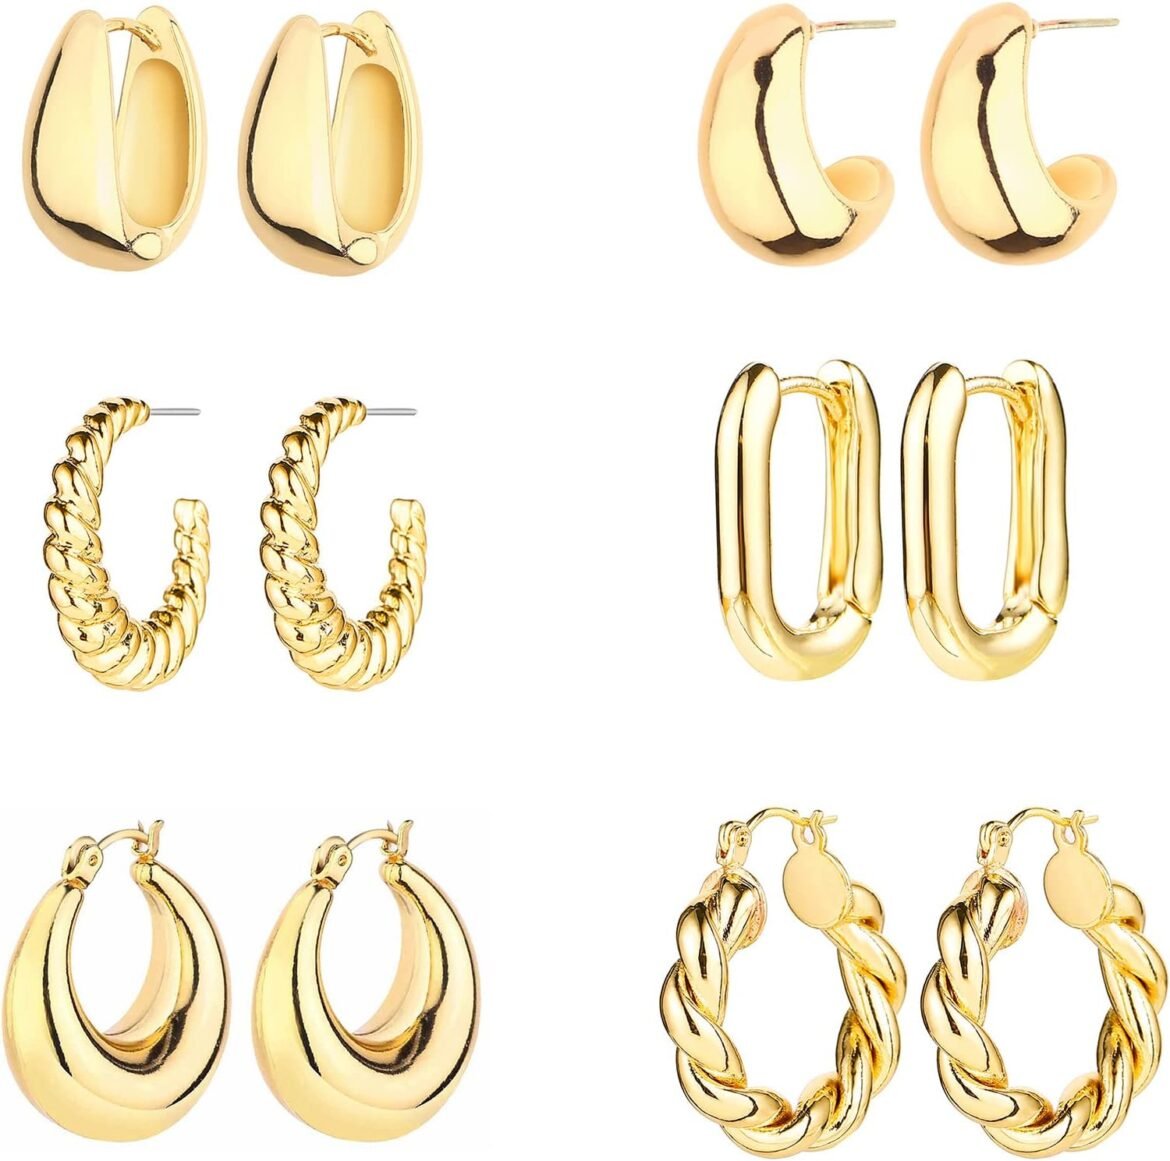 Ultimate Guide To Gold Huggie Earrings Styles, Benefits & Buying Tips